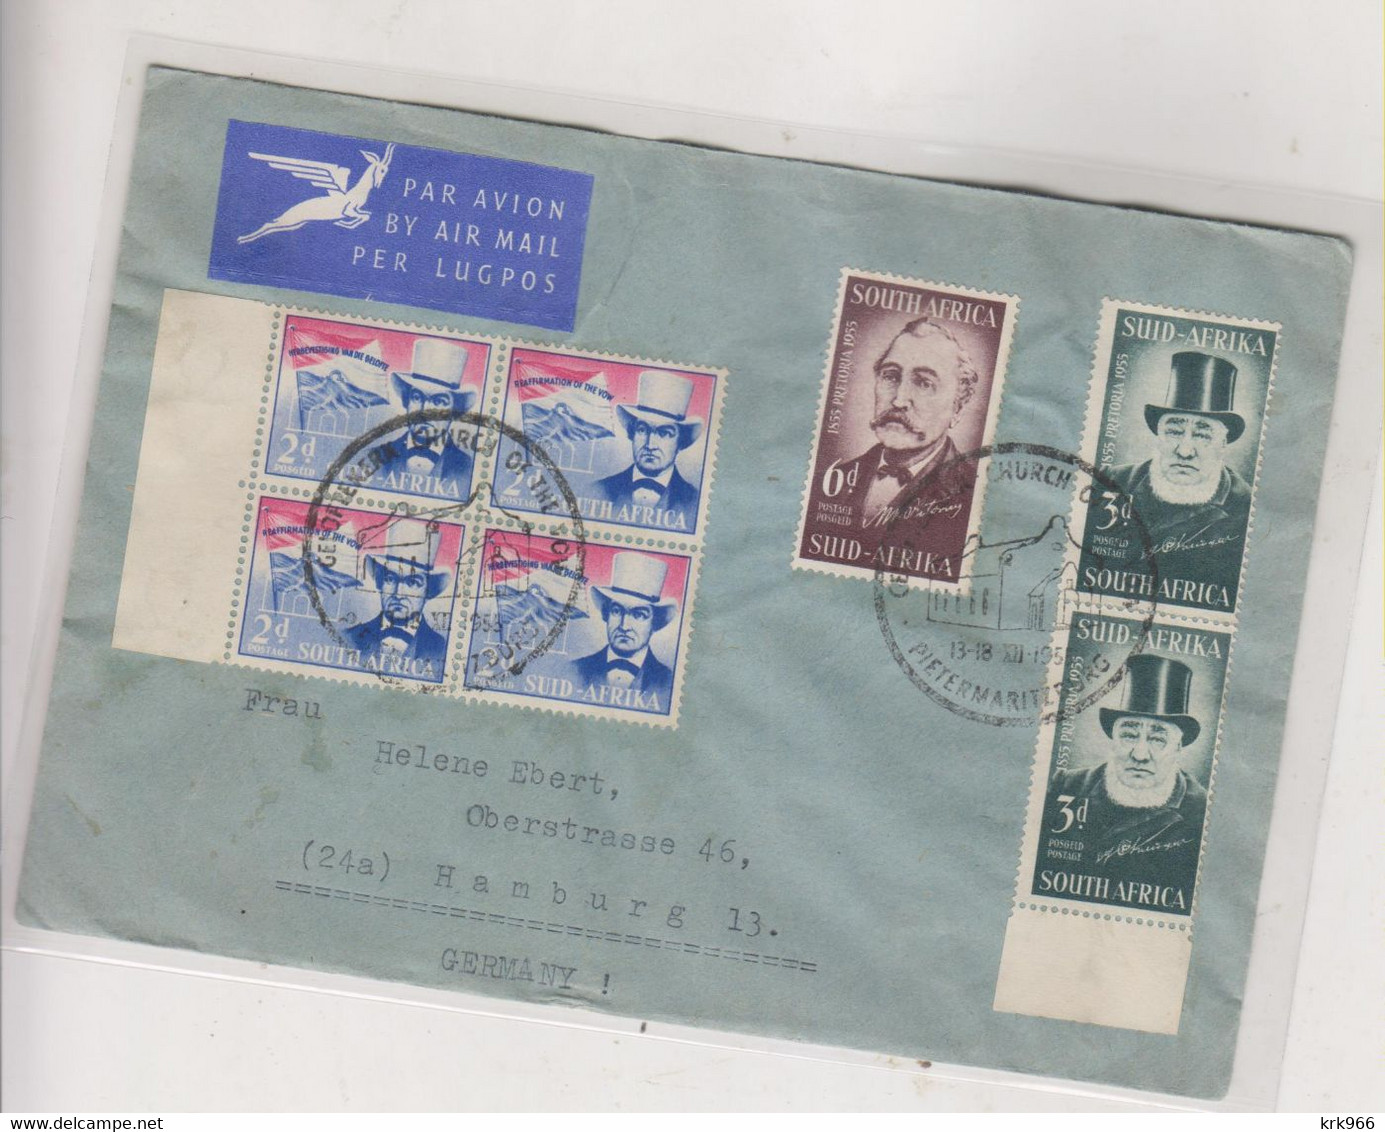 SOUTH AFRICA 1955 Pietermaritzburg Nice Airmail Cover To Germany - Posta Aerea